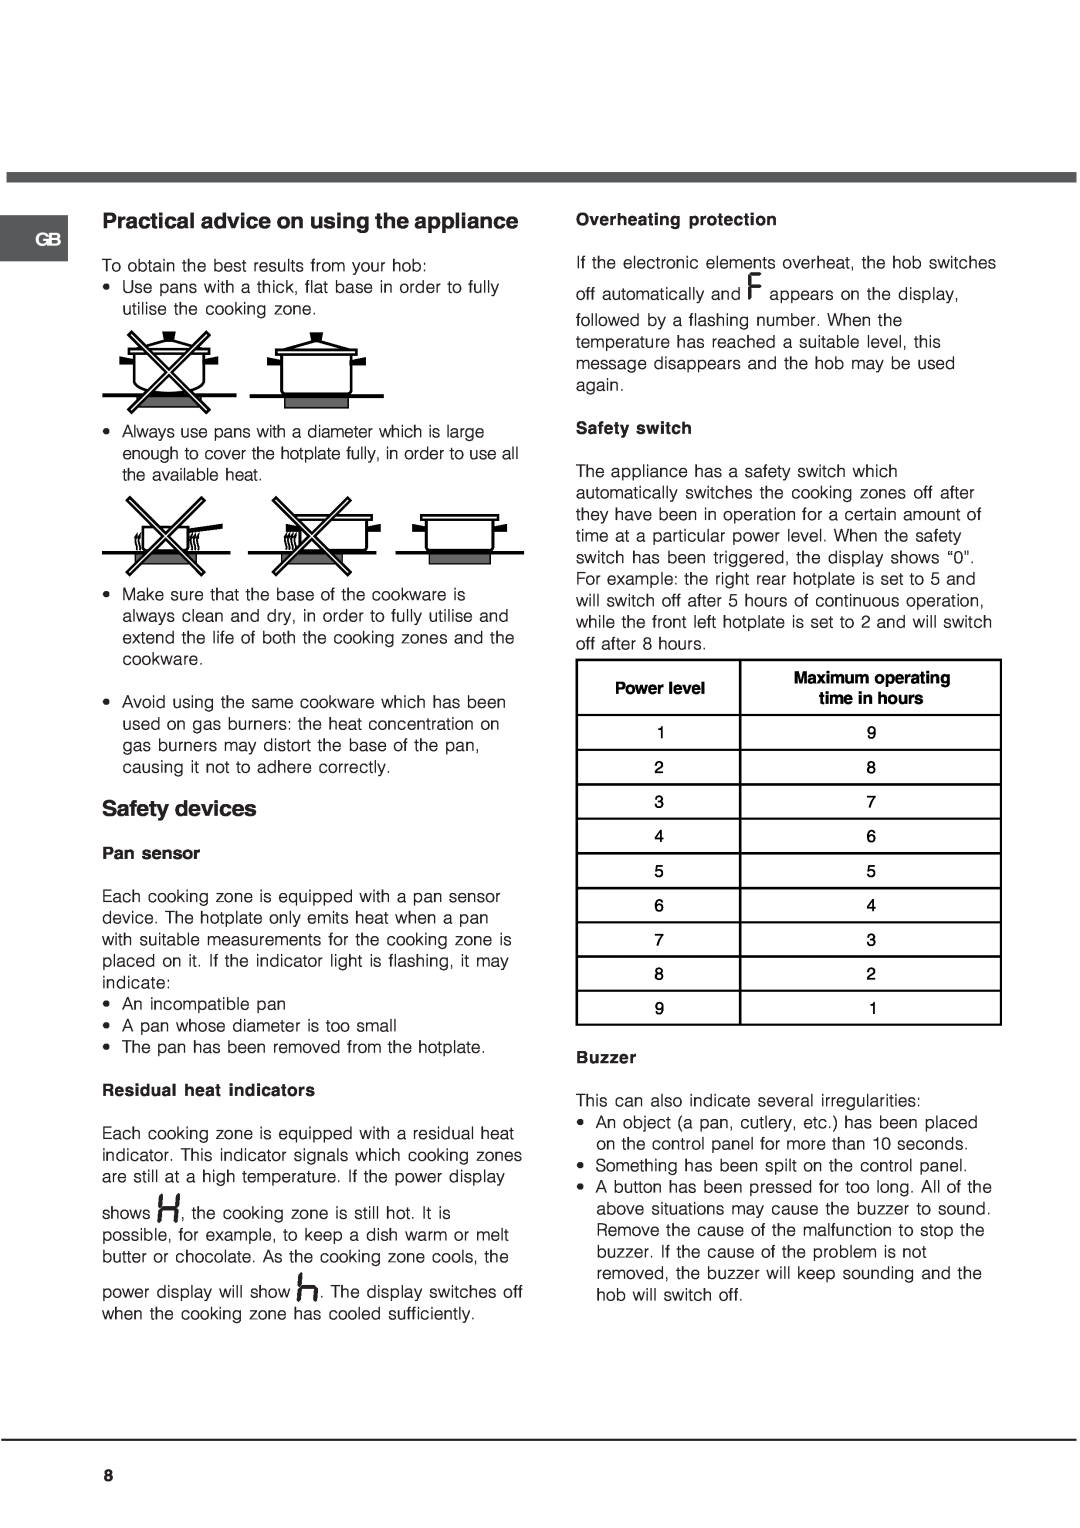 Hotpoint CRA 641 DC operating instructions Practical advice on using the appliance, Safety devices 